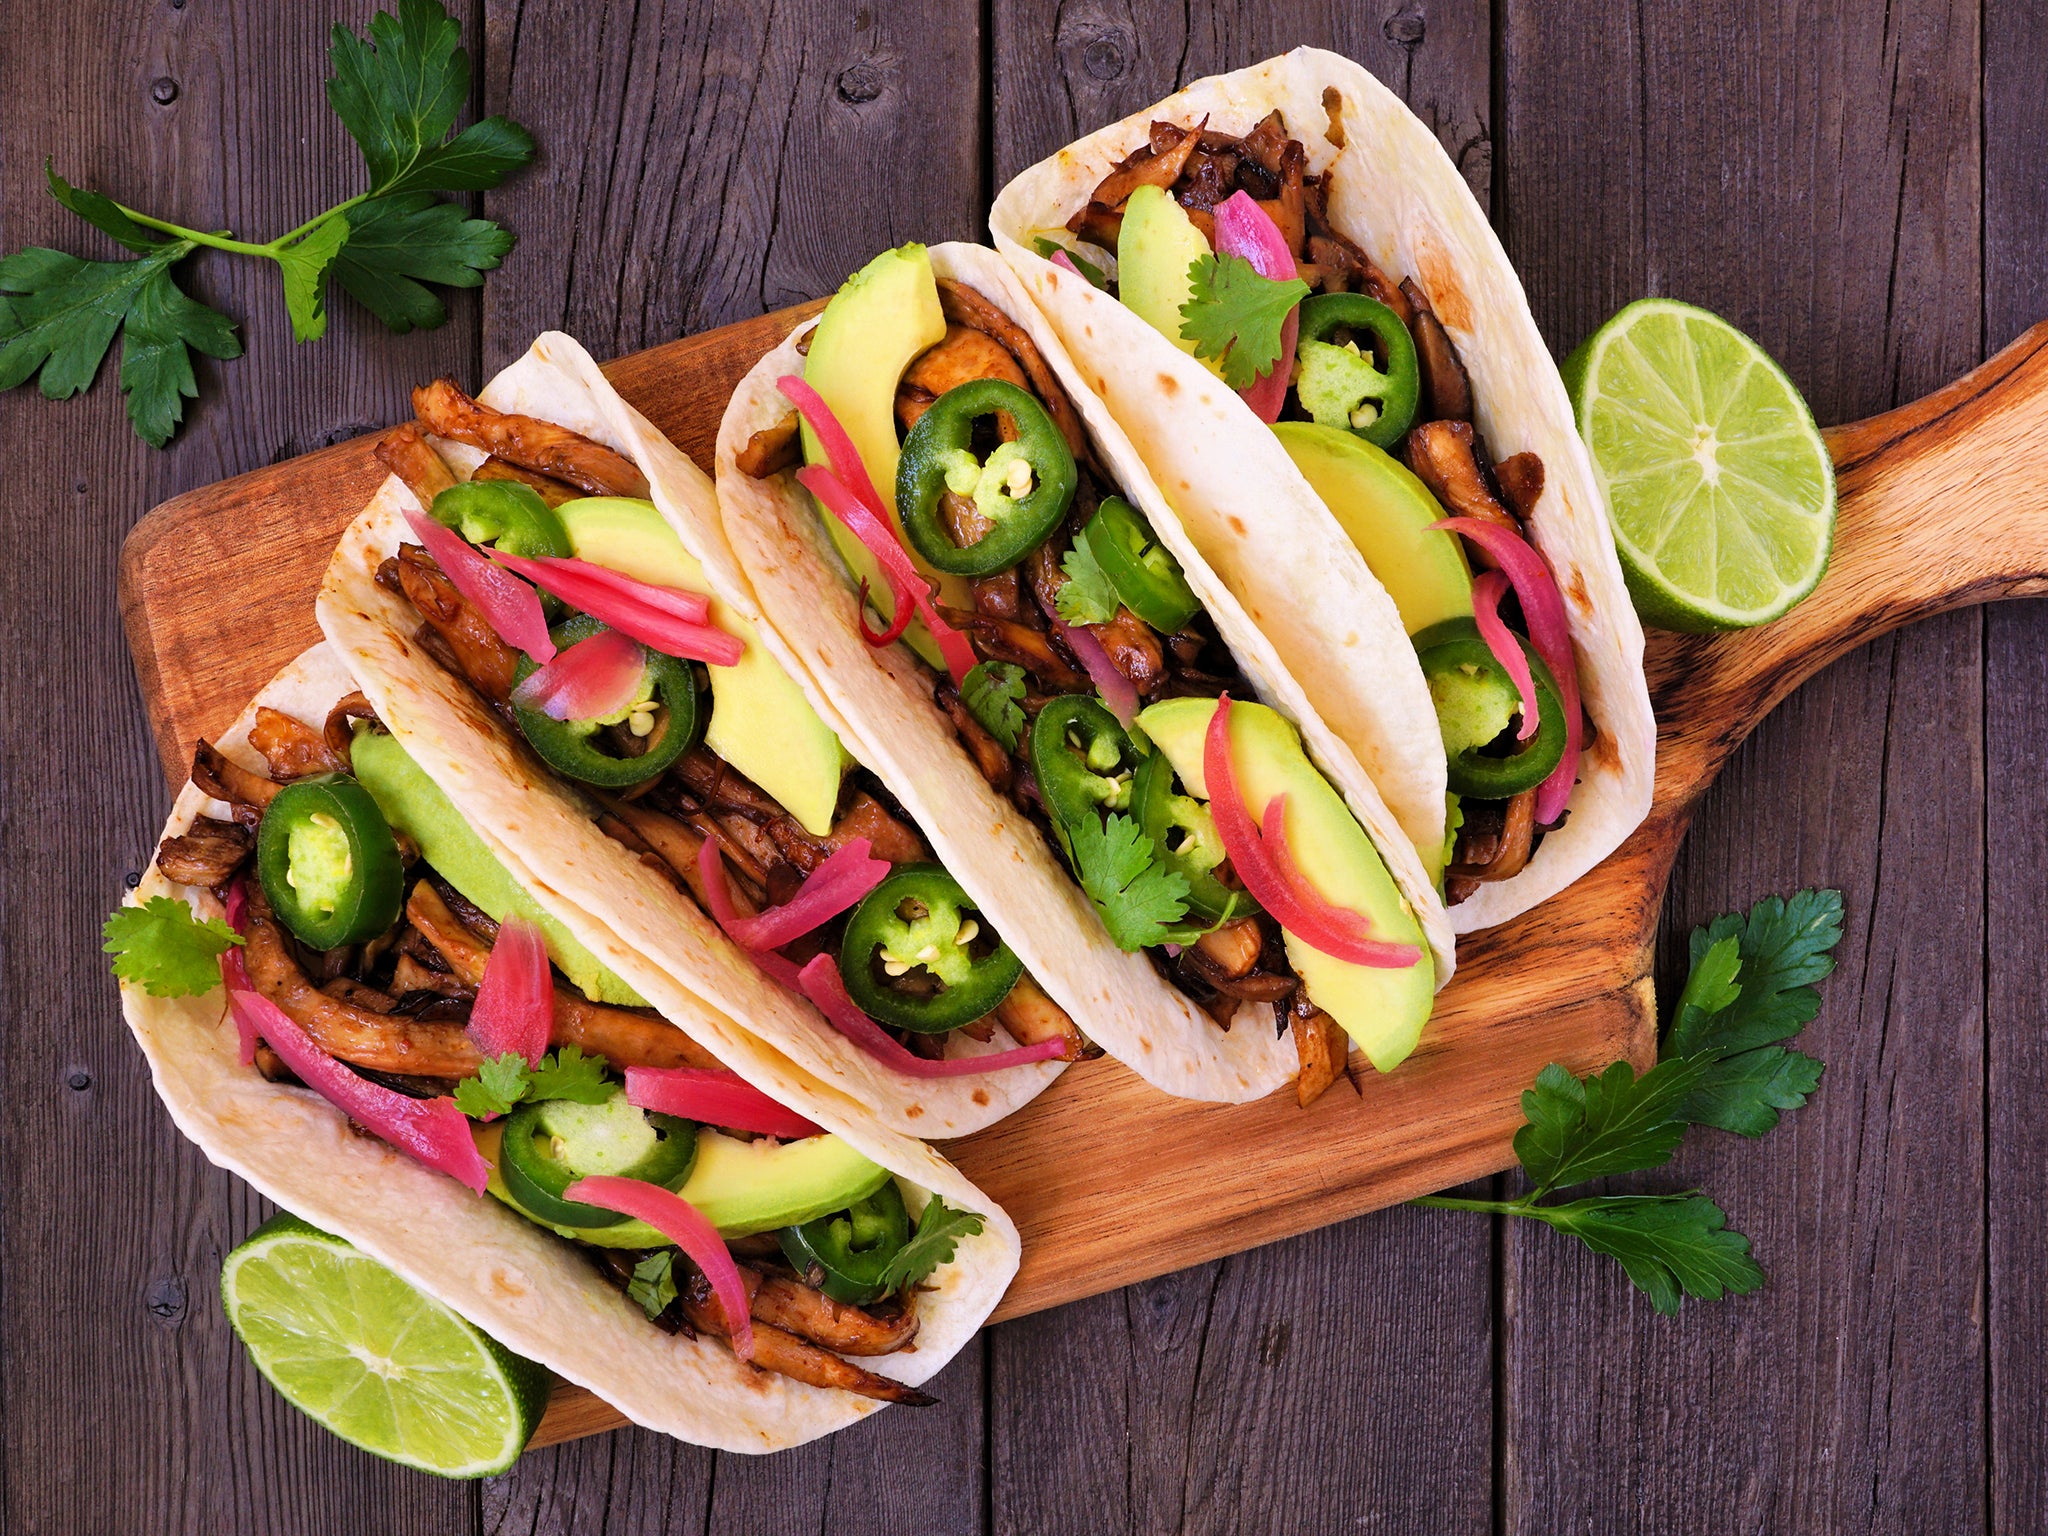 These quick tacos taste like pulled meat but they’re completely vegan